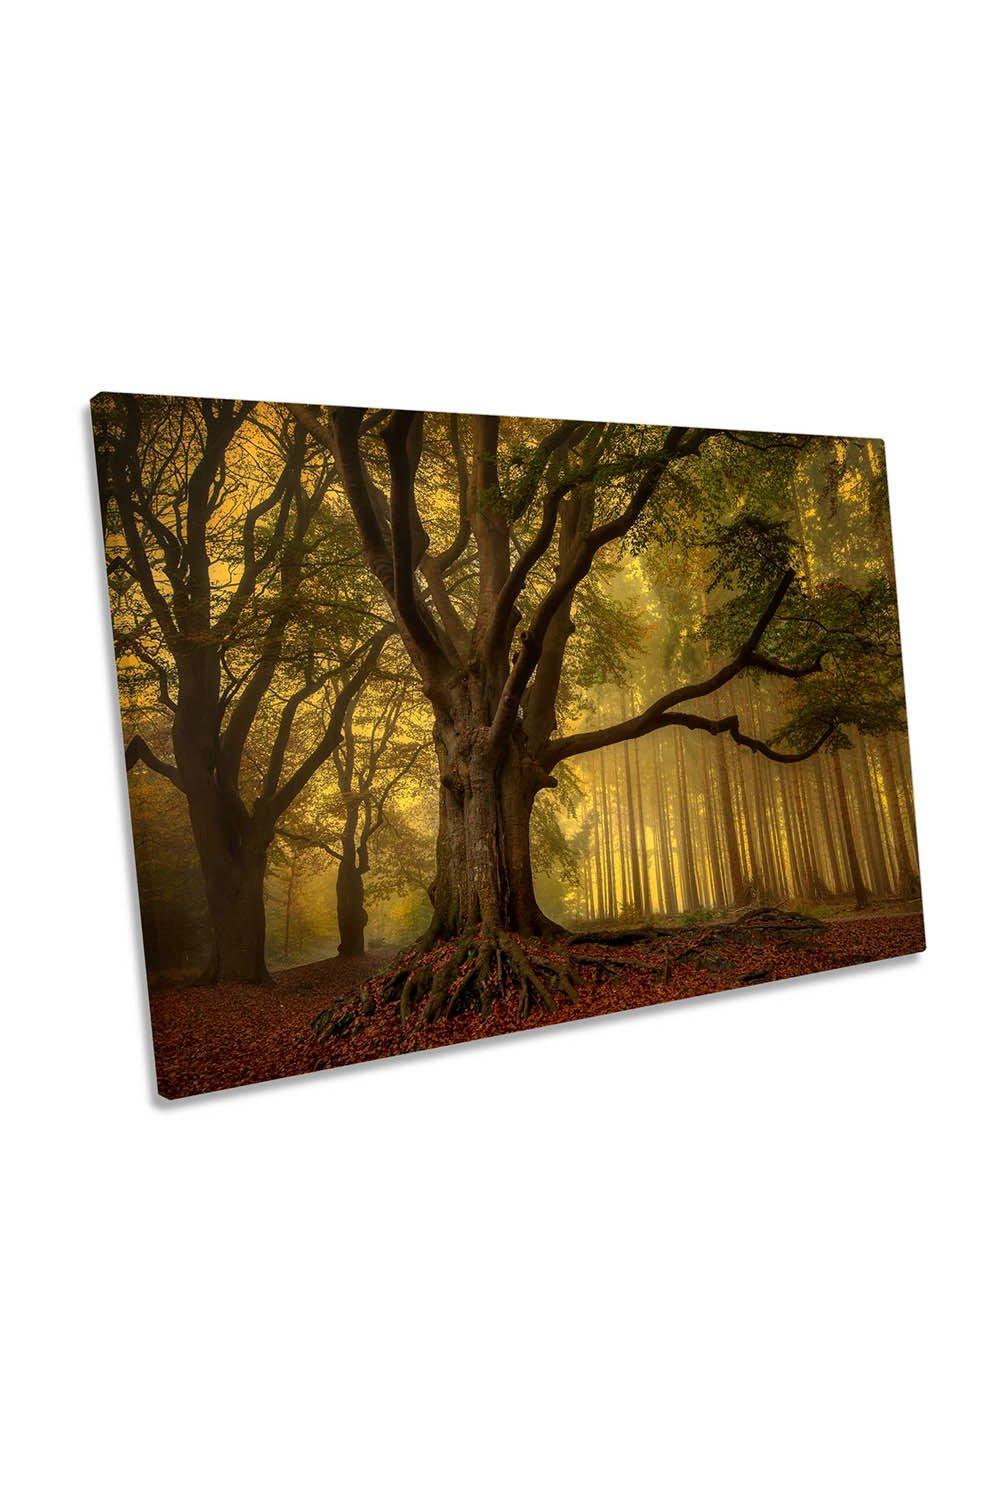 Old Tree Autumn Forest Misty Canvas Wall Art Picture Print